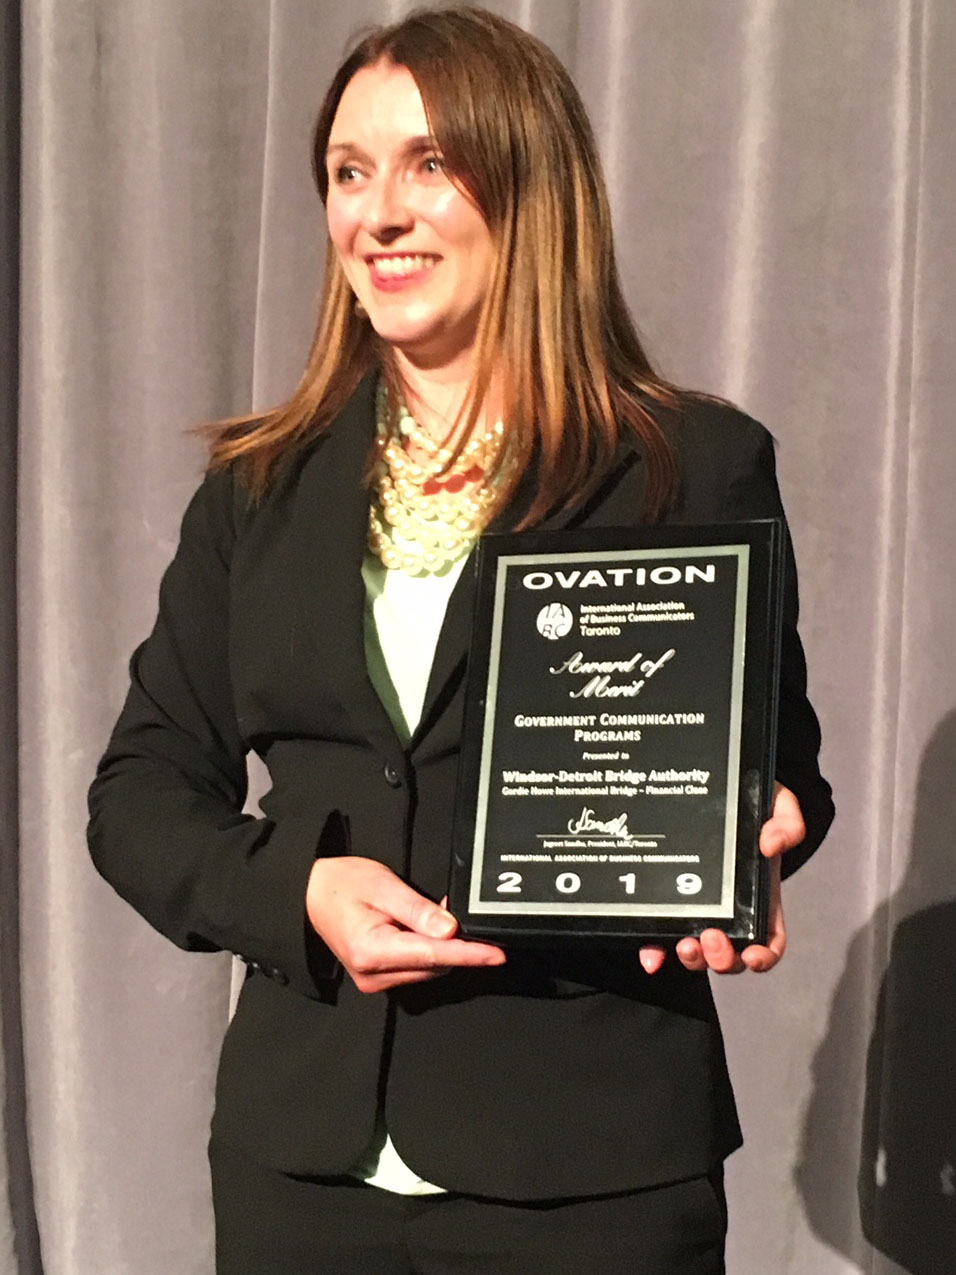 Photo of WDBA representative accepting 2019 Ovation Award which reads "Award of Merit - Government Communication Programs"